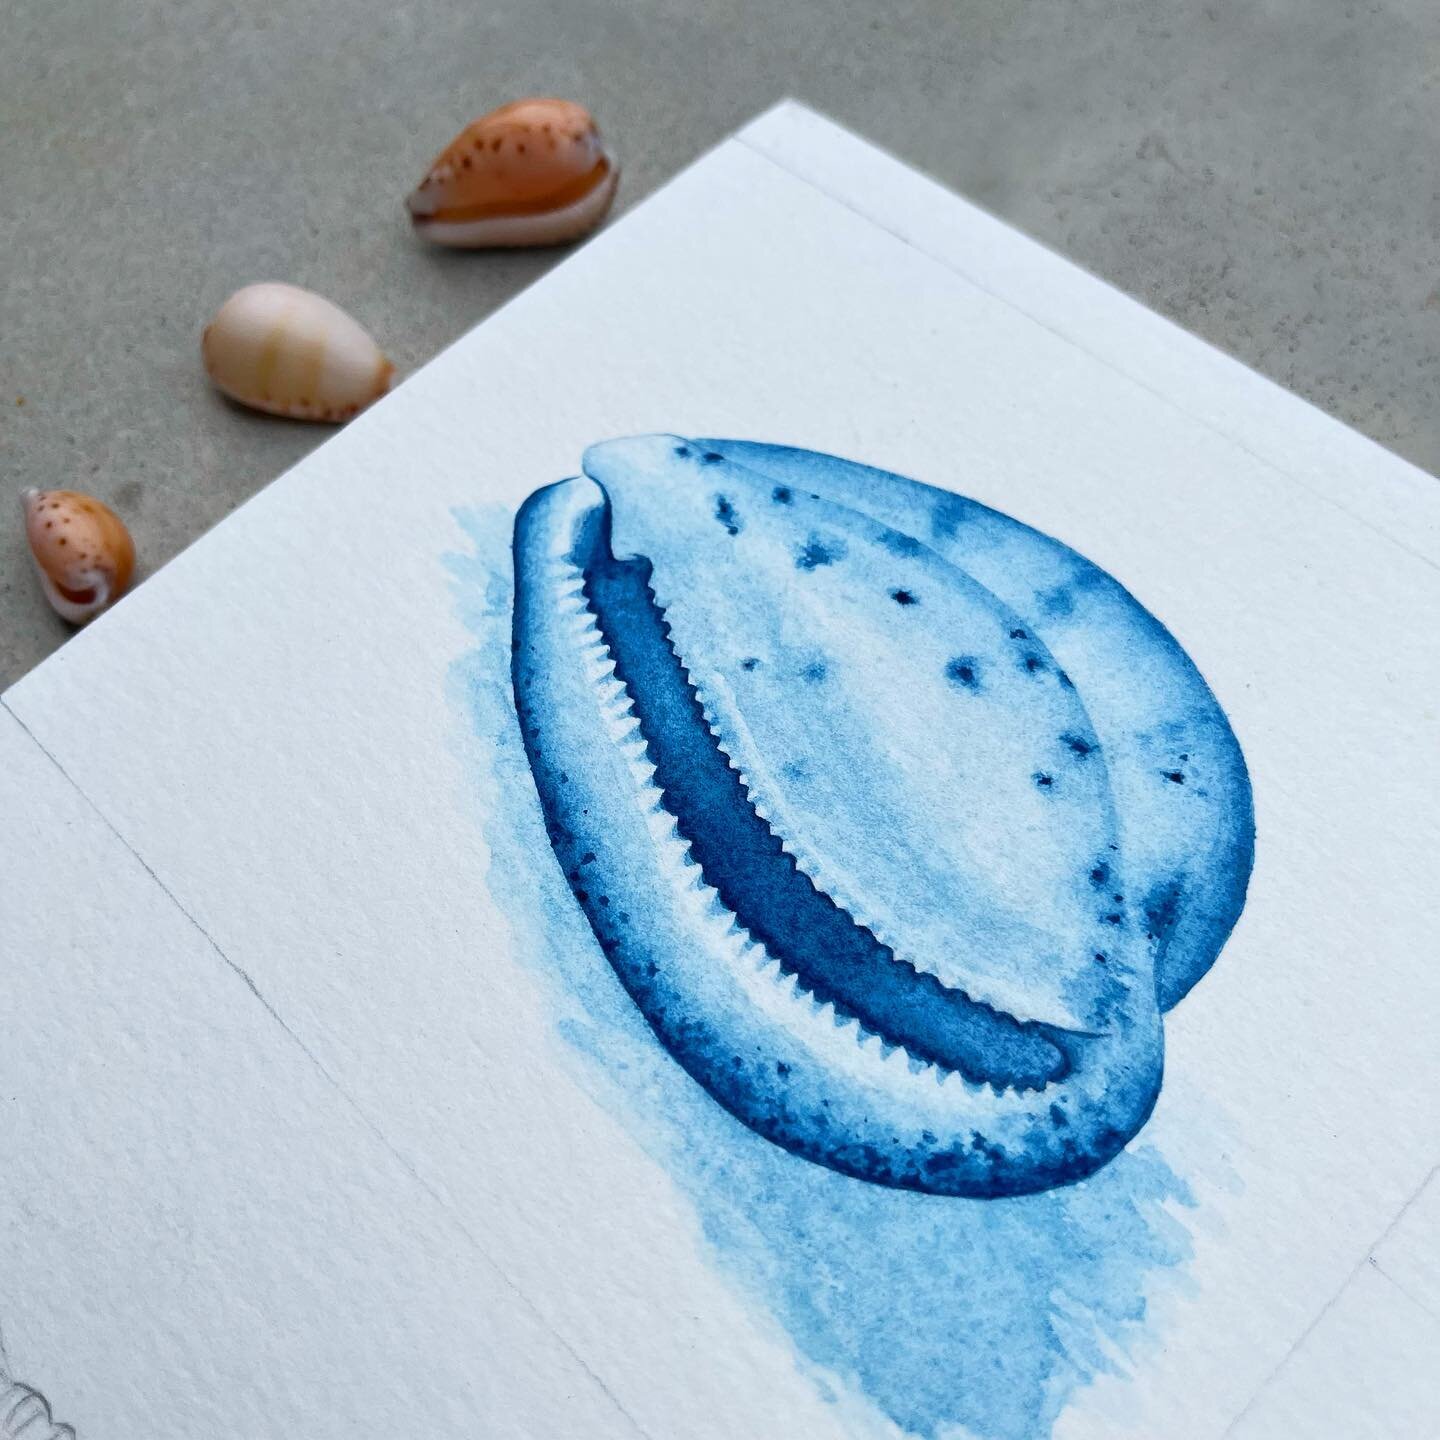 &bull;COWRY&bull;
.
.
.
Had a splendid time painting this piece. 2 more shells to come! What do you think?!

Don&rsquo;t forget to swim in the ocean this week 🌊🐚

#rachelcbondart #cowry #shell #watercolour #esperance #wa #westernaustralia #art